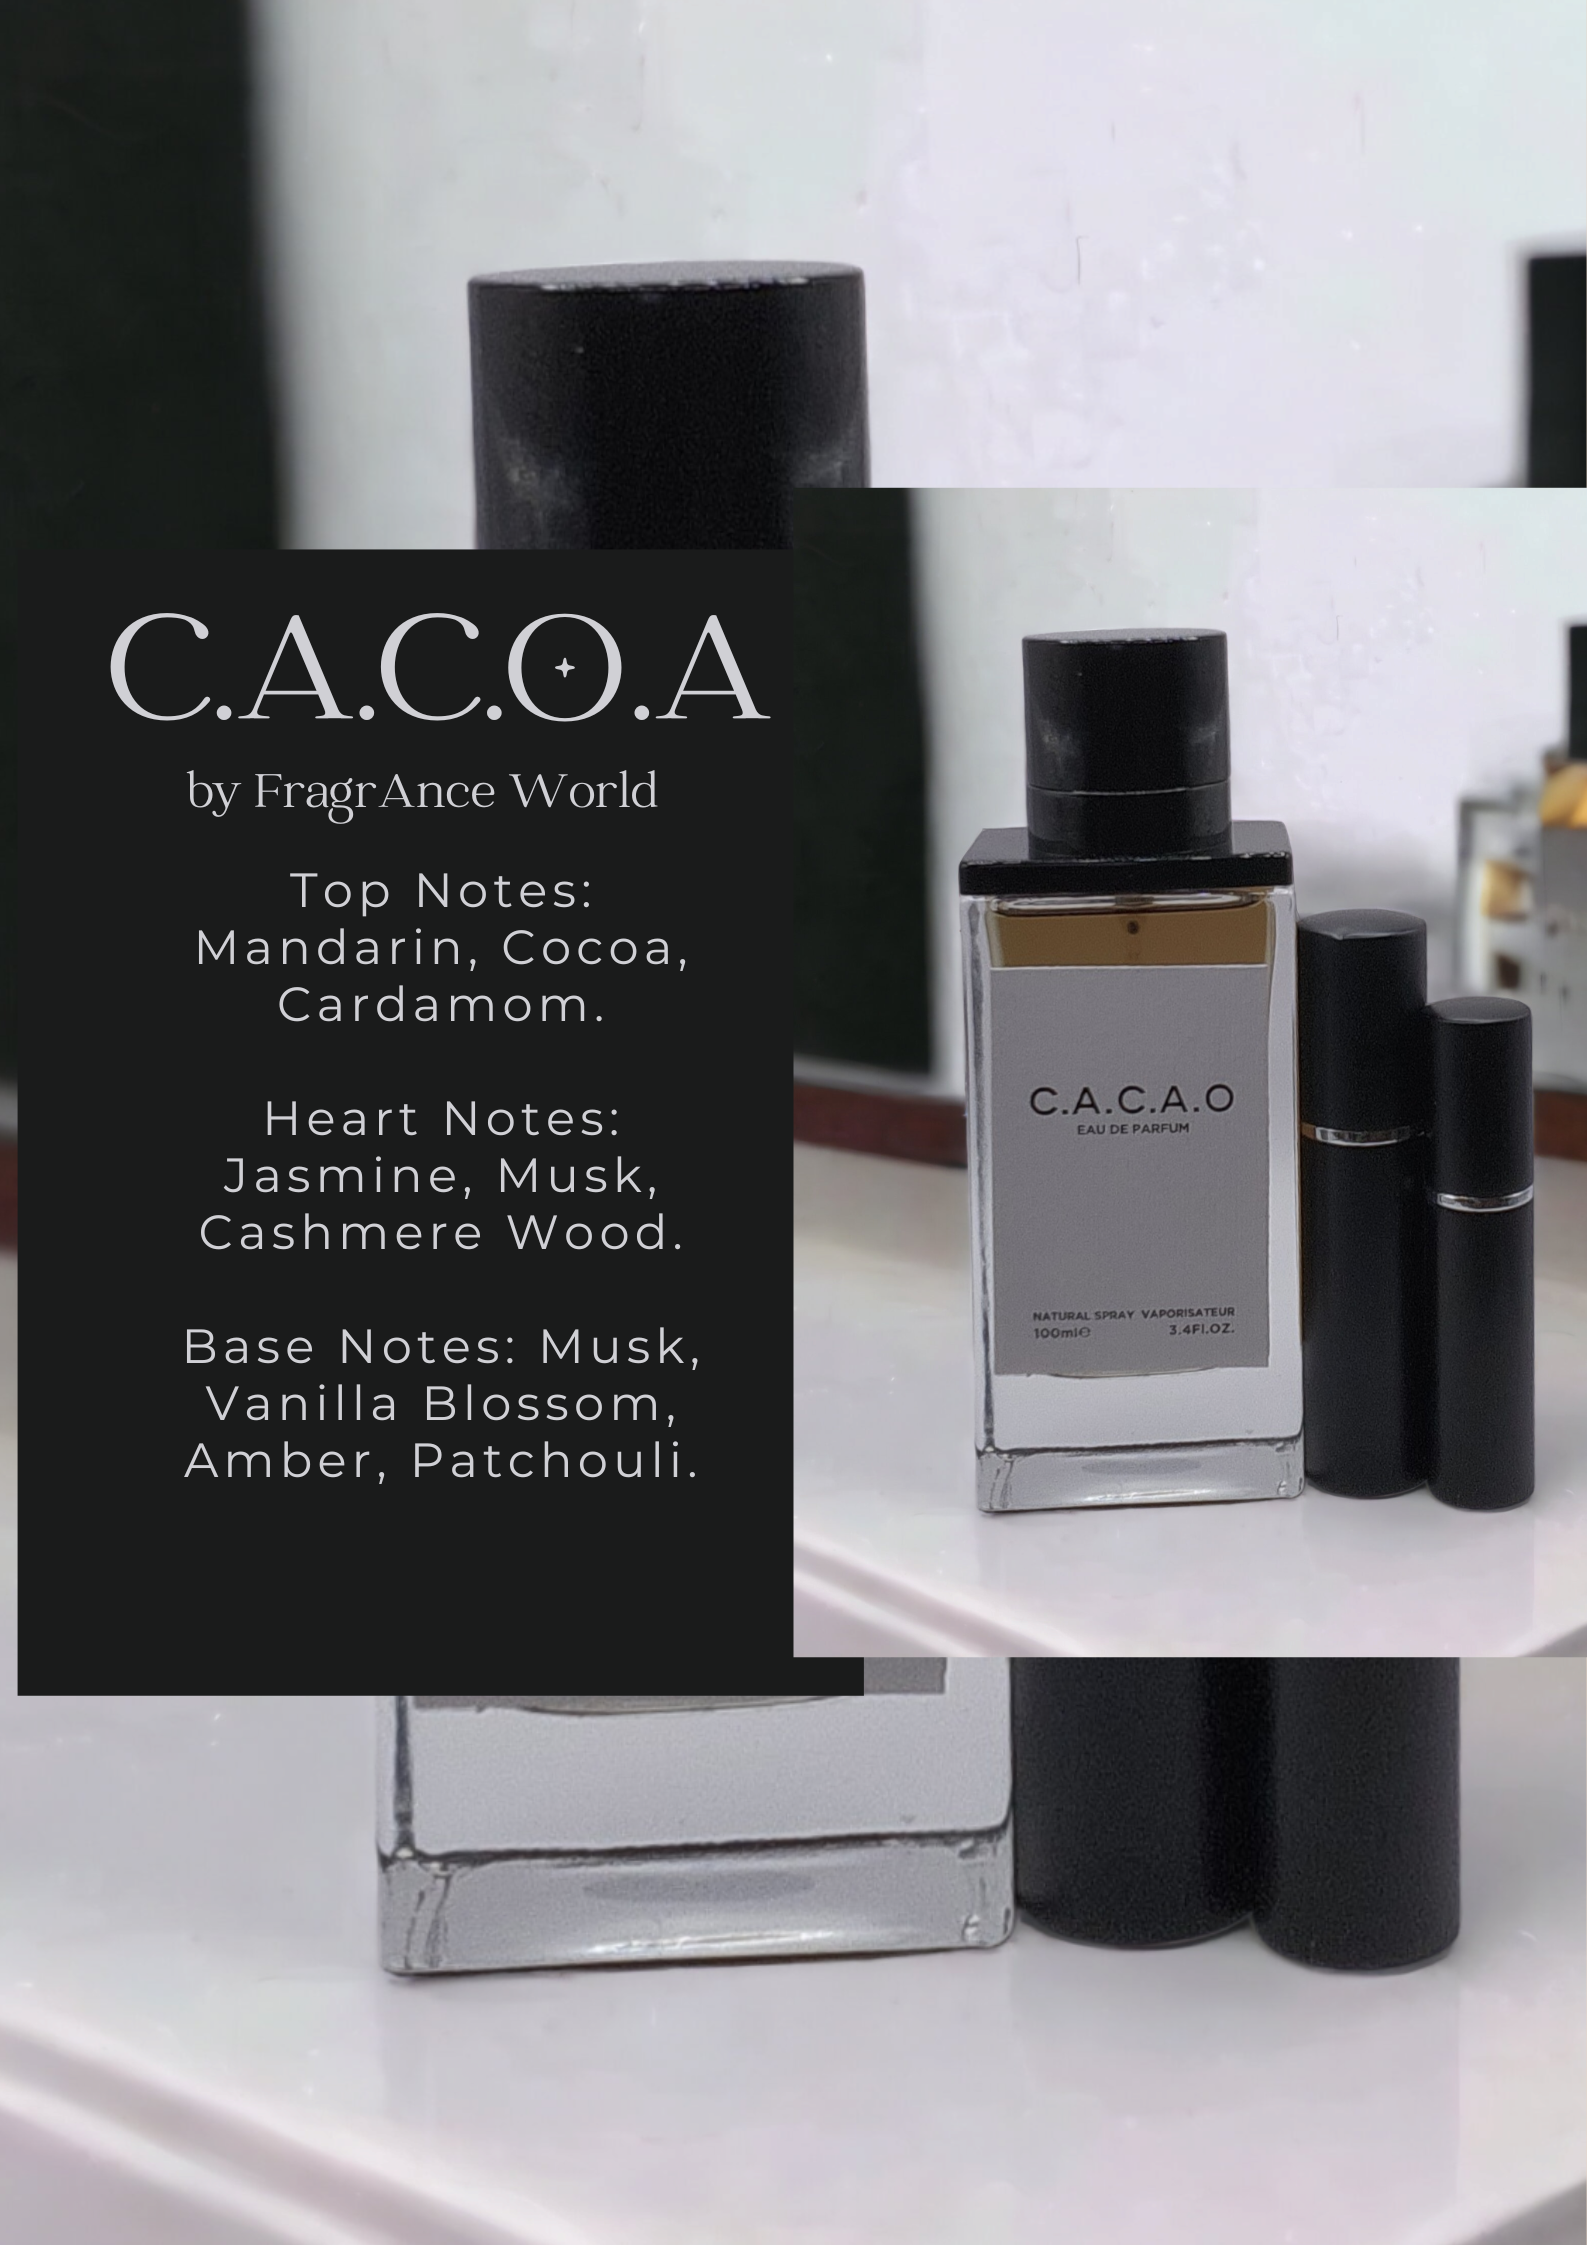 Decant of C.A.C.A.O by Fragrance World